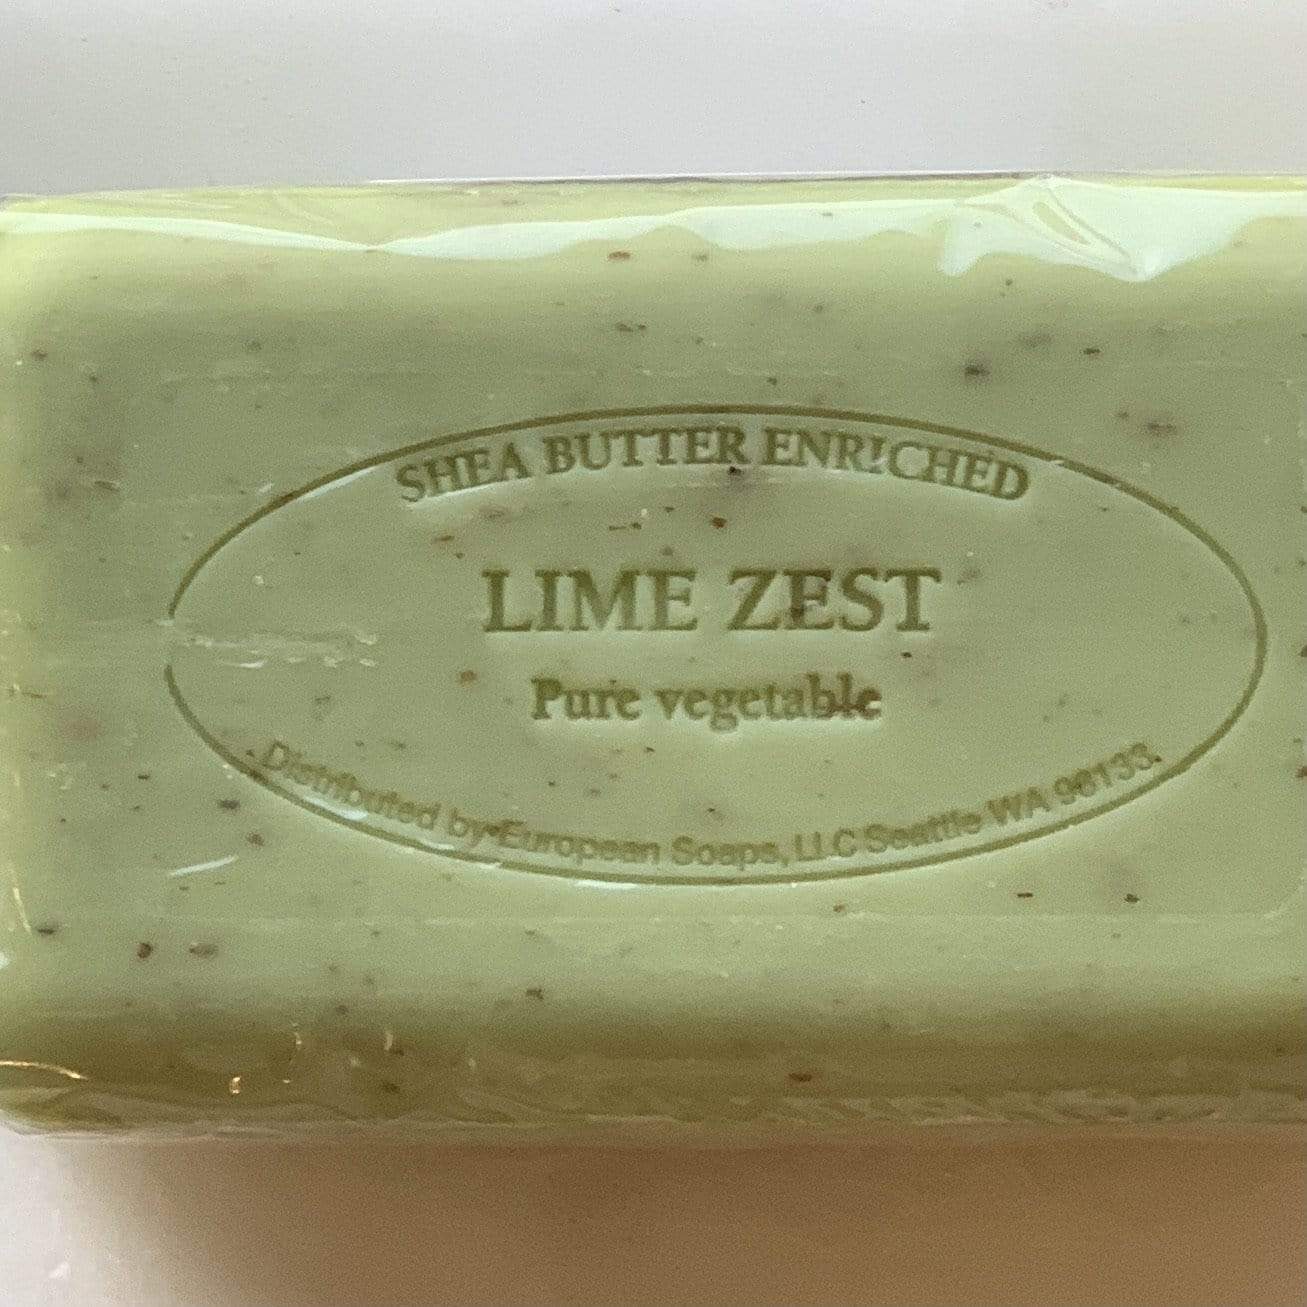 Lime Zest French Milled Soap - 150g - PORCH